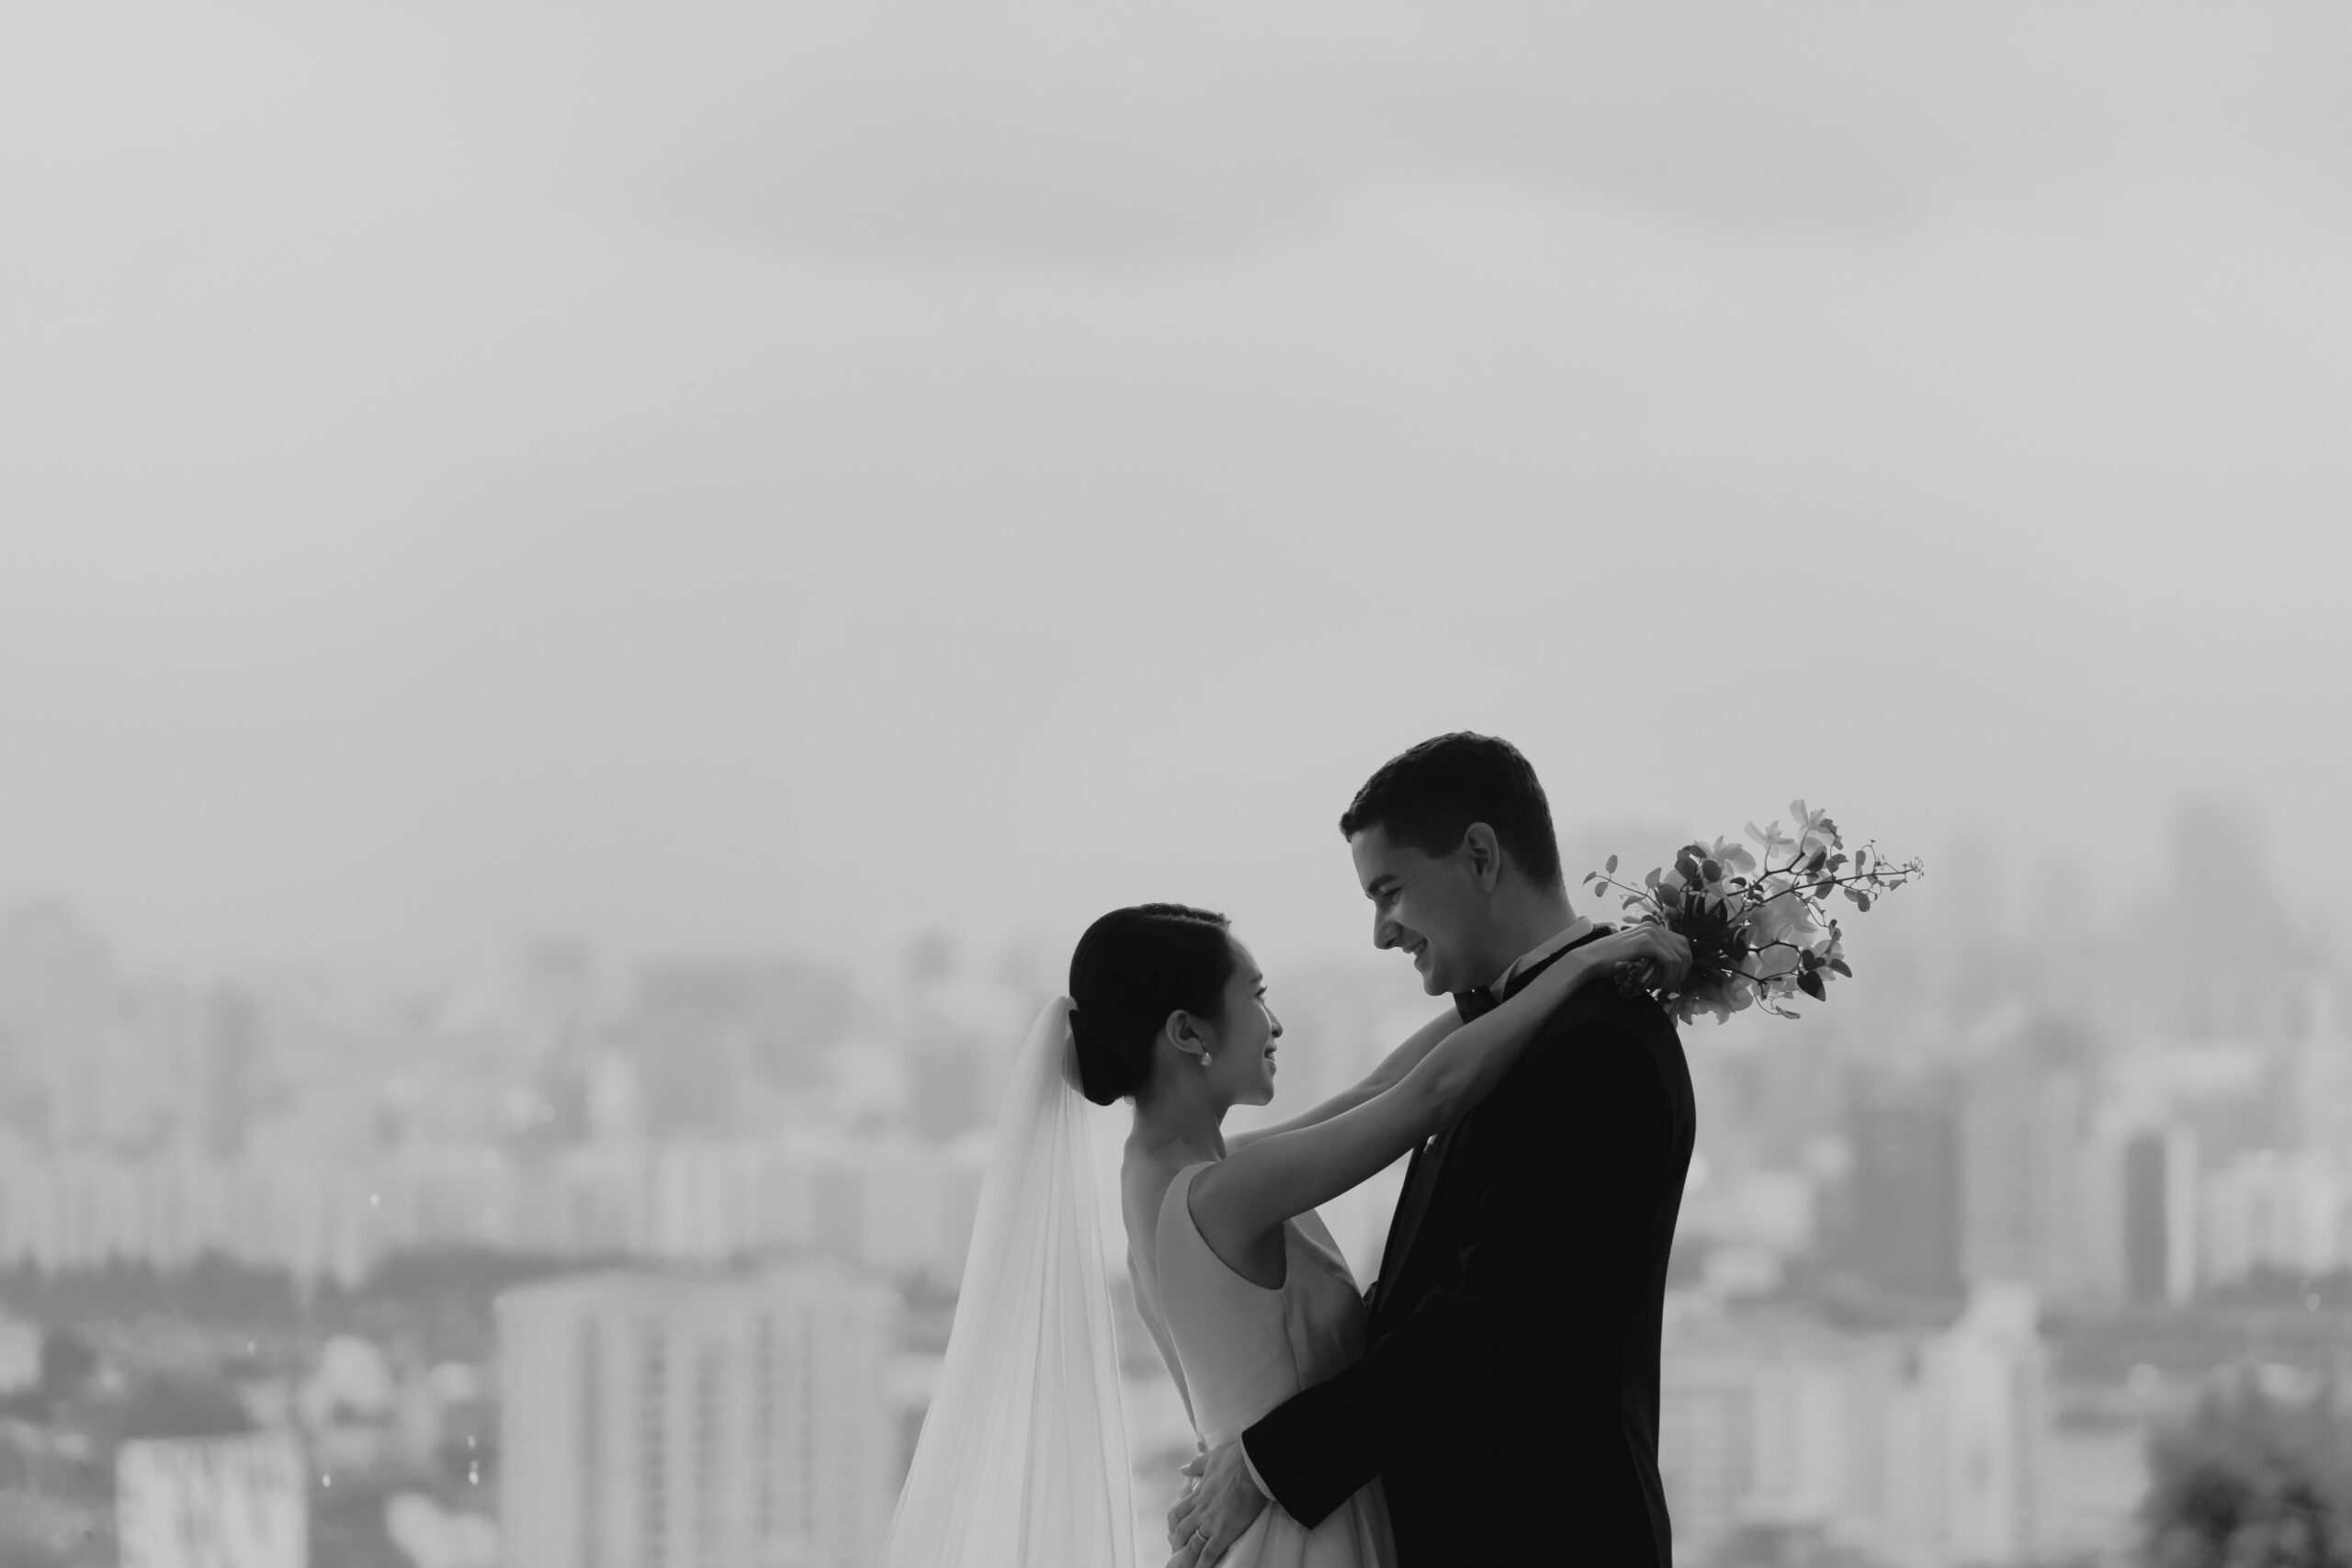 black and white photo of a bride and groom in front of the Seoul city skyline.